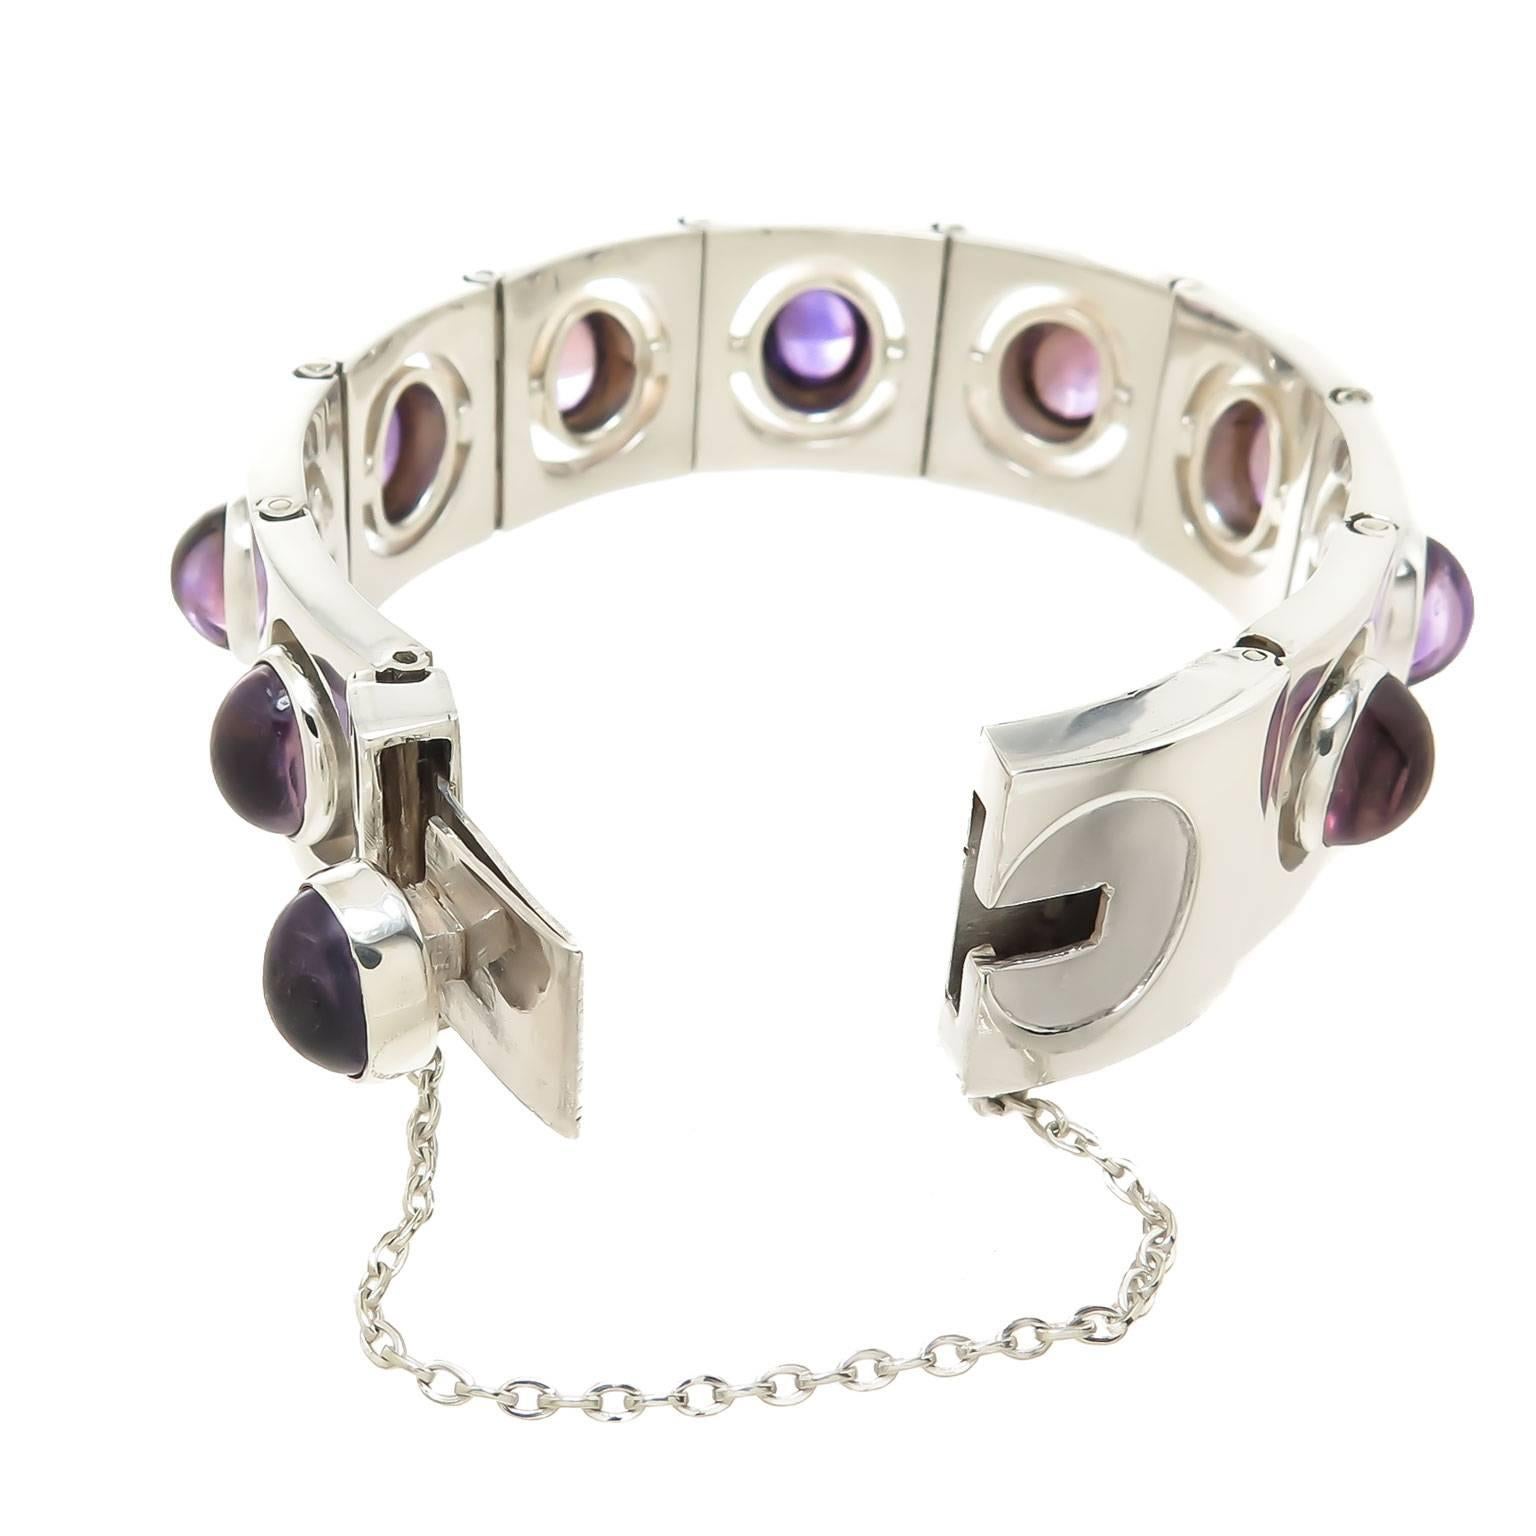 Circa 1960 Antonio Pineda Sterling silver Bracelet, the Bracelet is comprised of individually hinged square links that fit very flush together and each are set with a Very fine color cabochon Amethyst that measure 3/8 x 3/8 inch. The bracelet